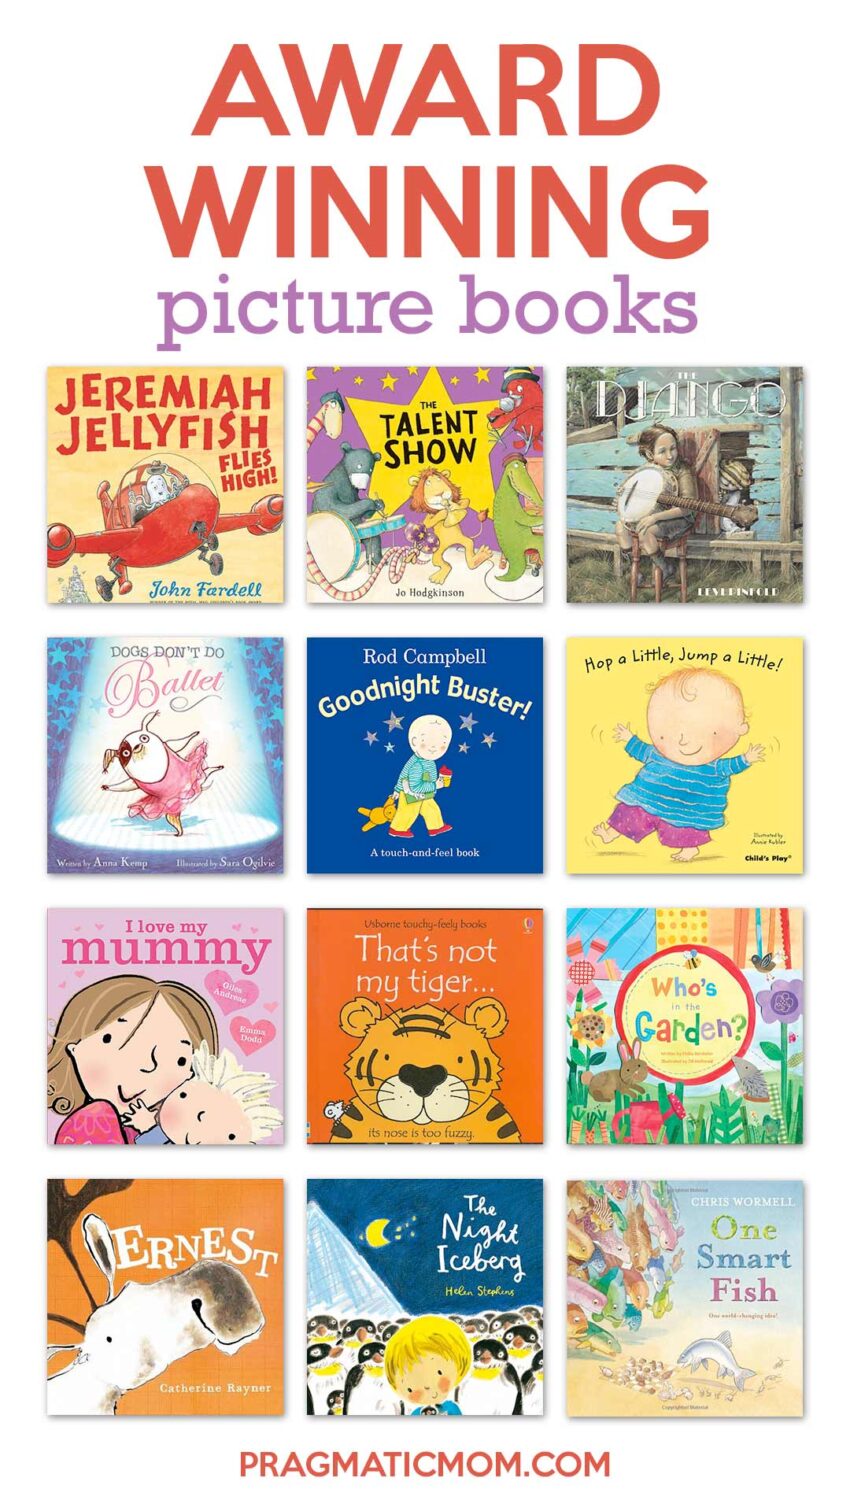 Award Winning Picture Books for Kids